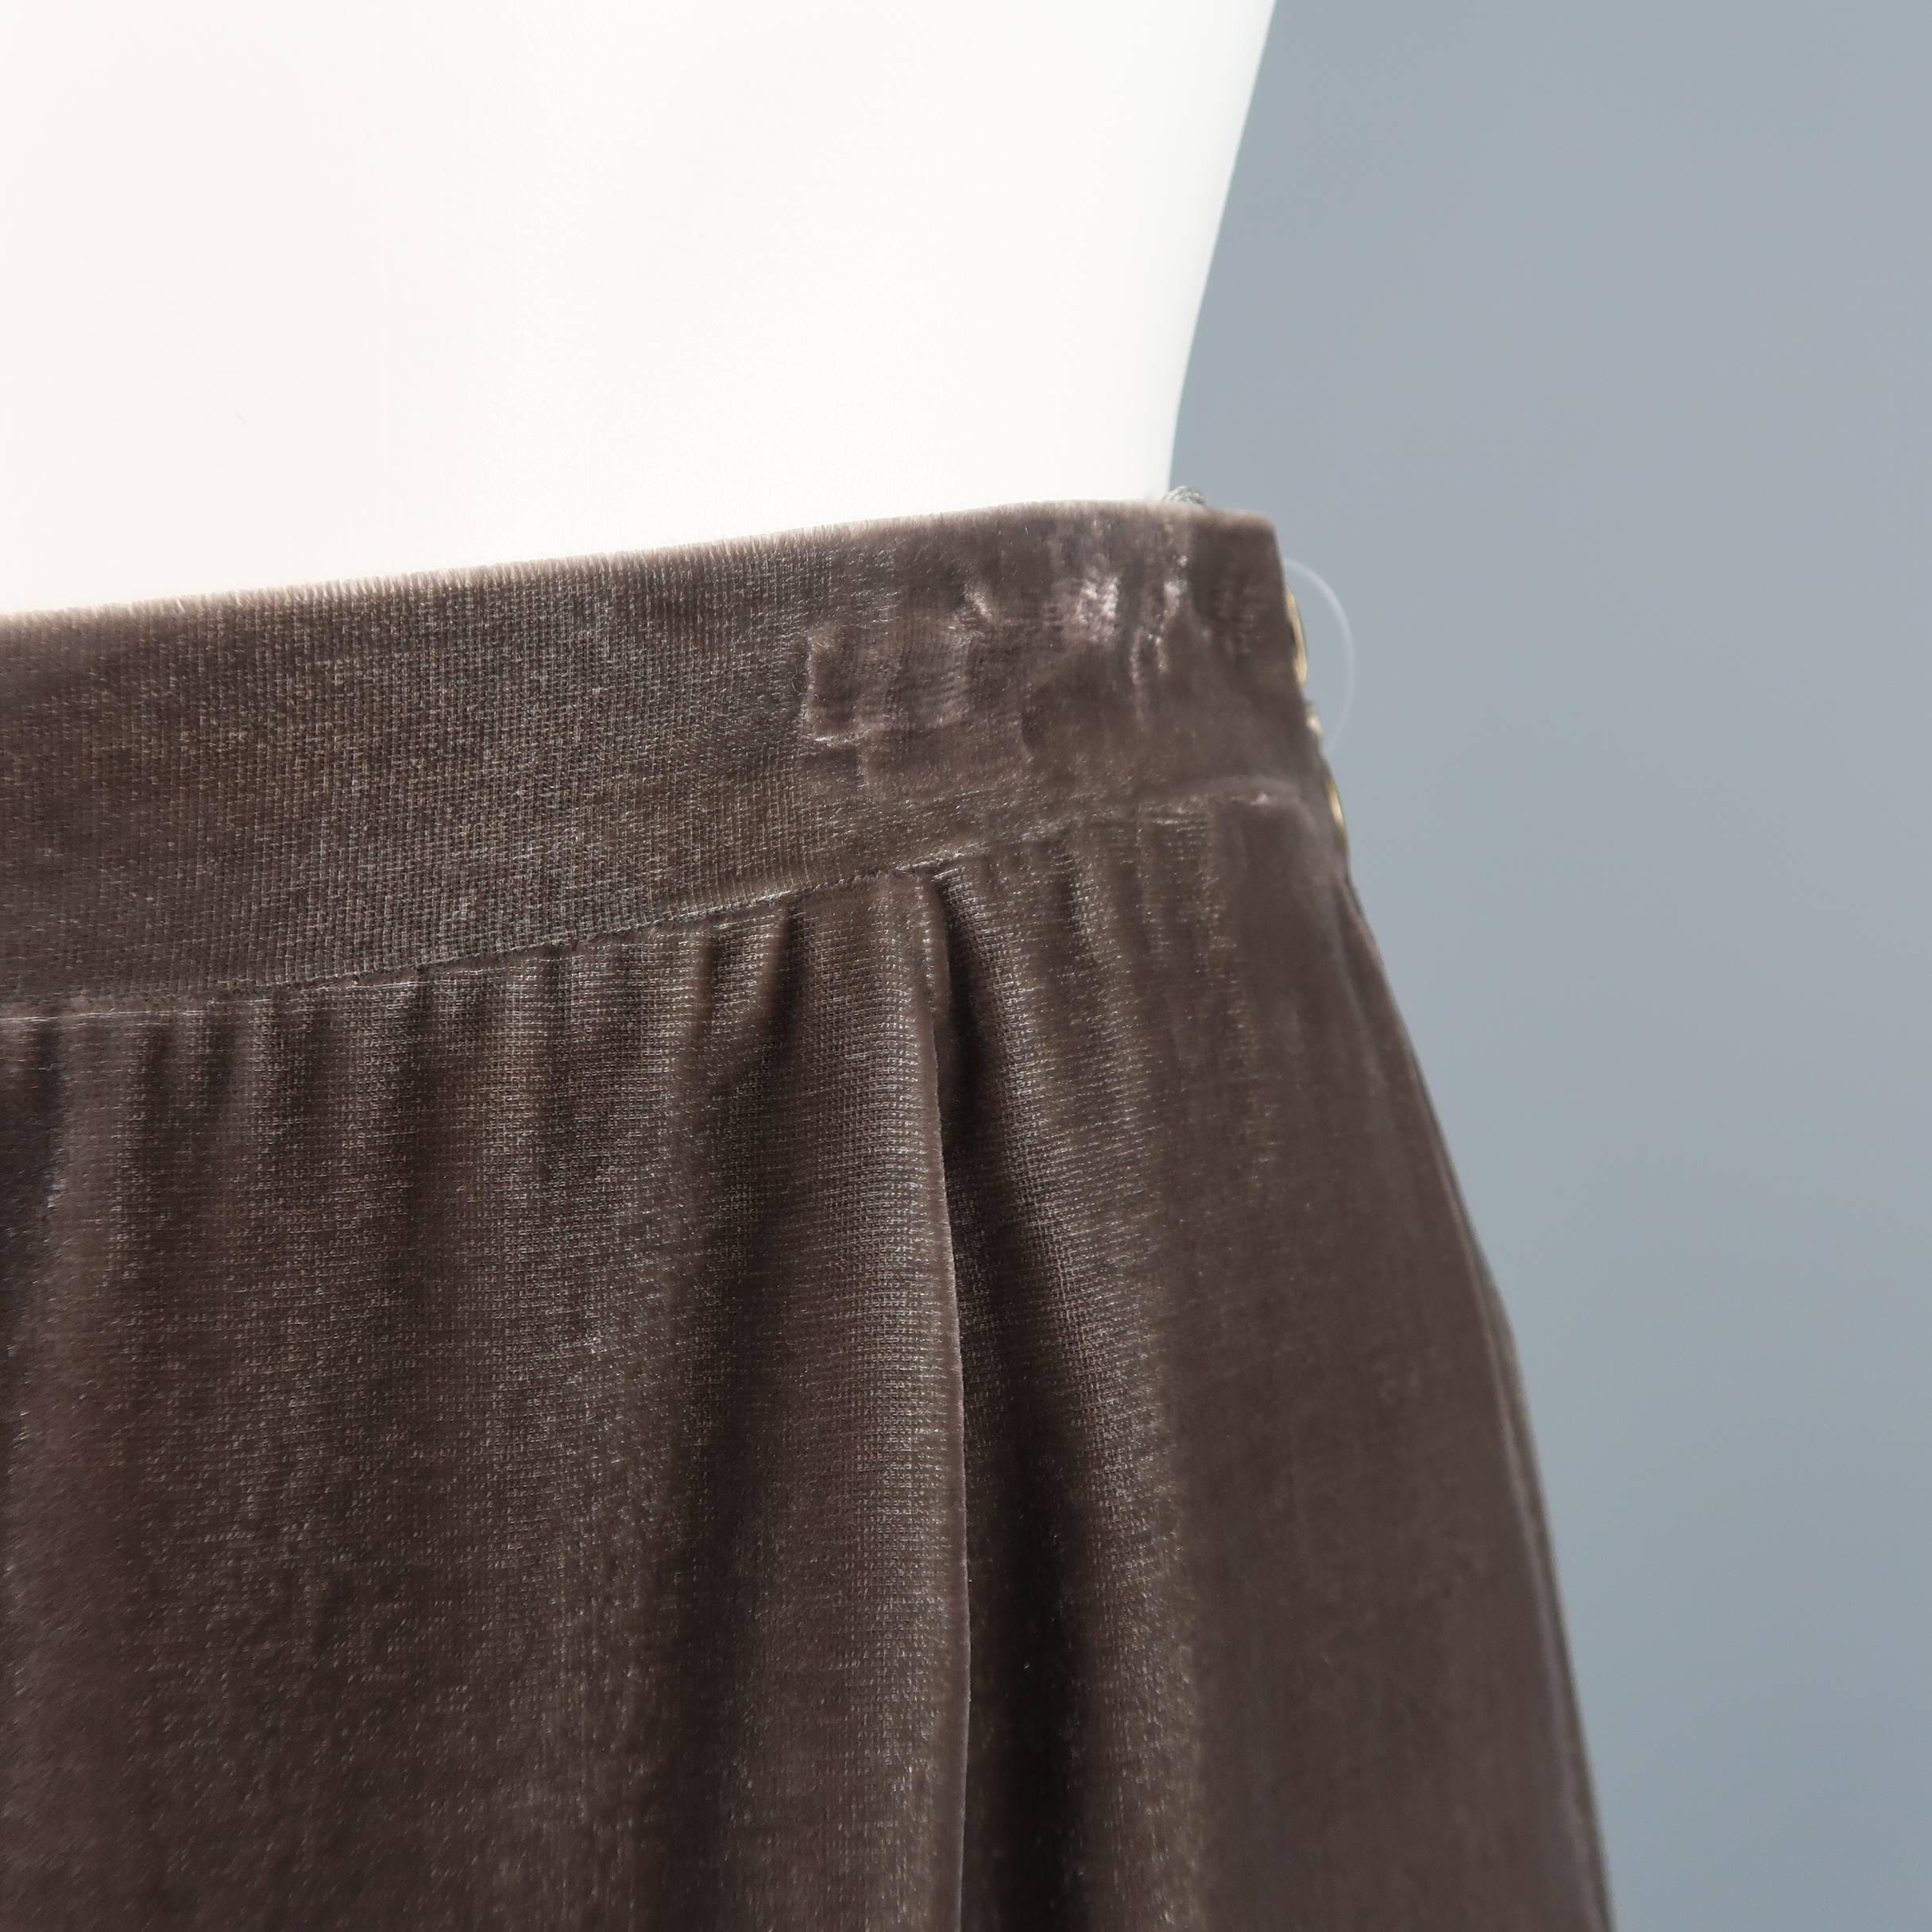 MISSONI pencil skirt comes in taupe gray silk blend velvet with a gathered front, and double dark gold tone zip sides. With Tags. Minor imperfections from hanger and tags. As-is. Made in Italy.
 
Fair Pre-Owned Condition.
Marked: IT 40
